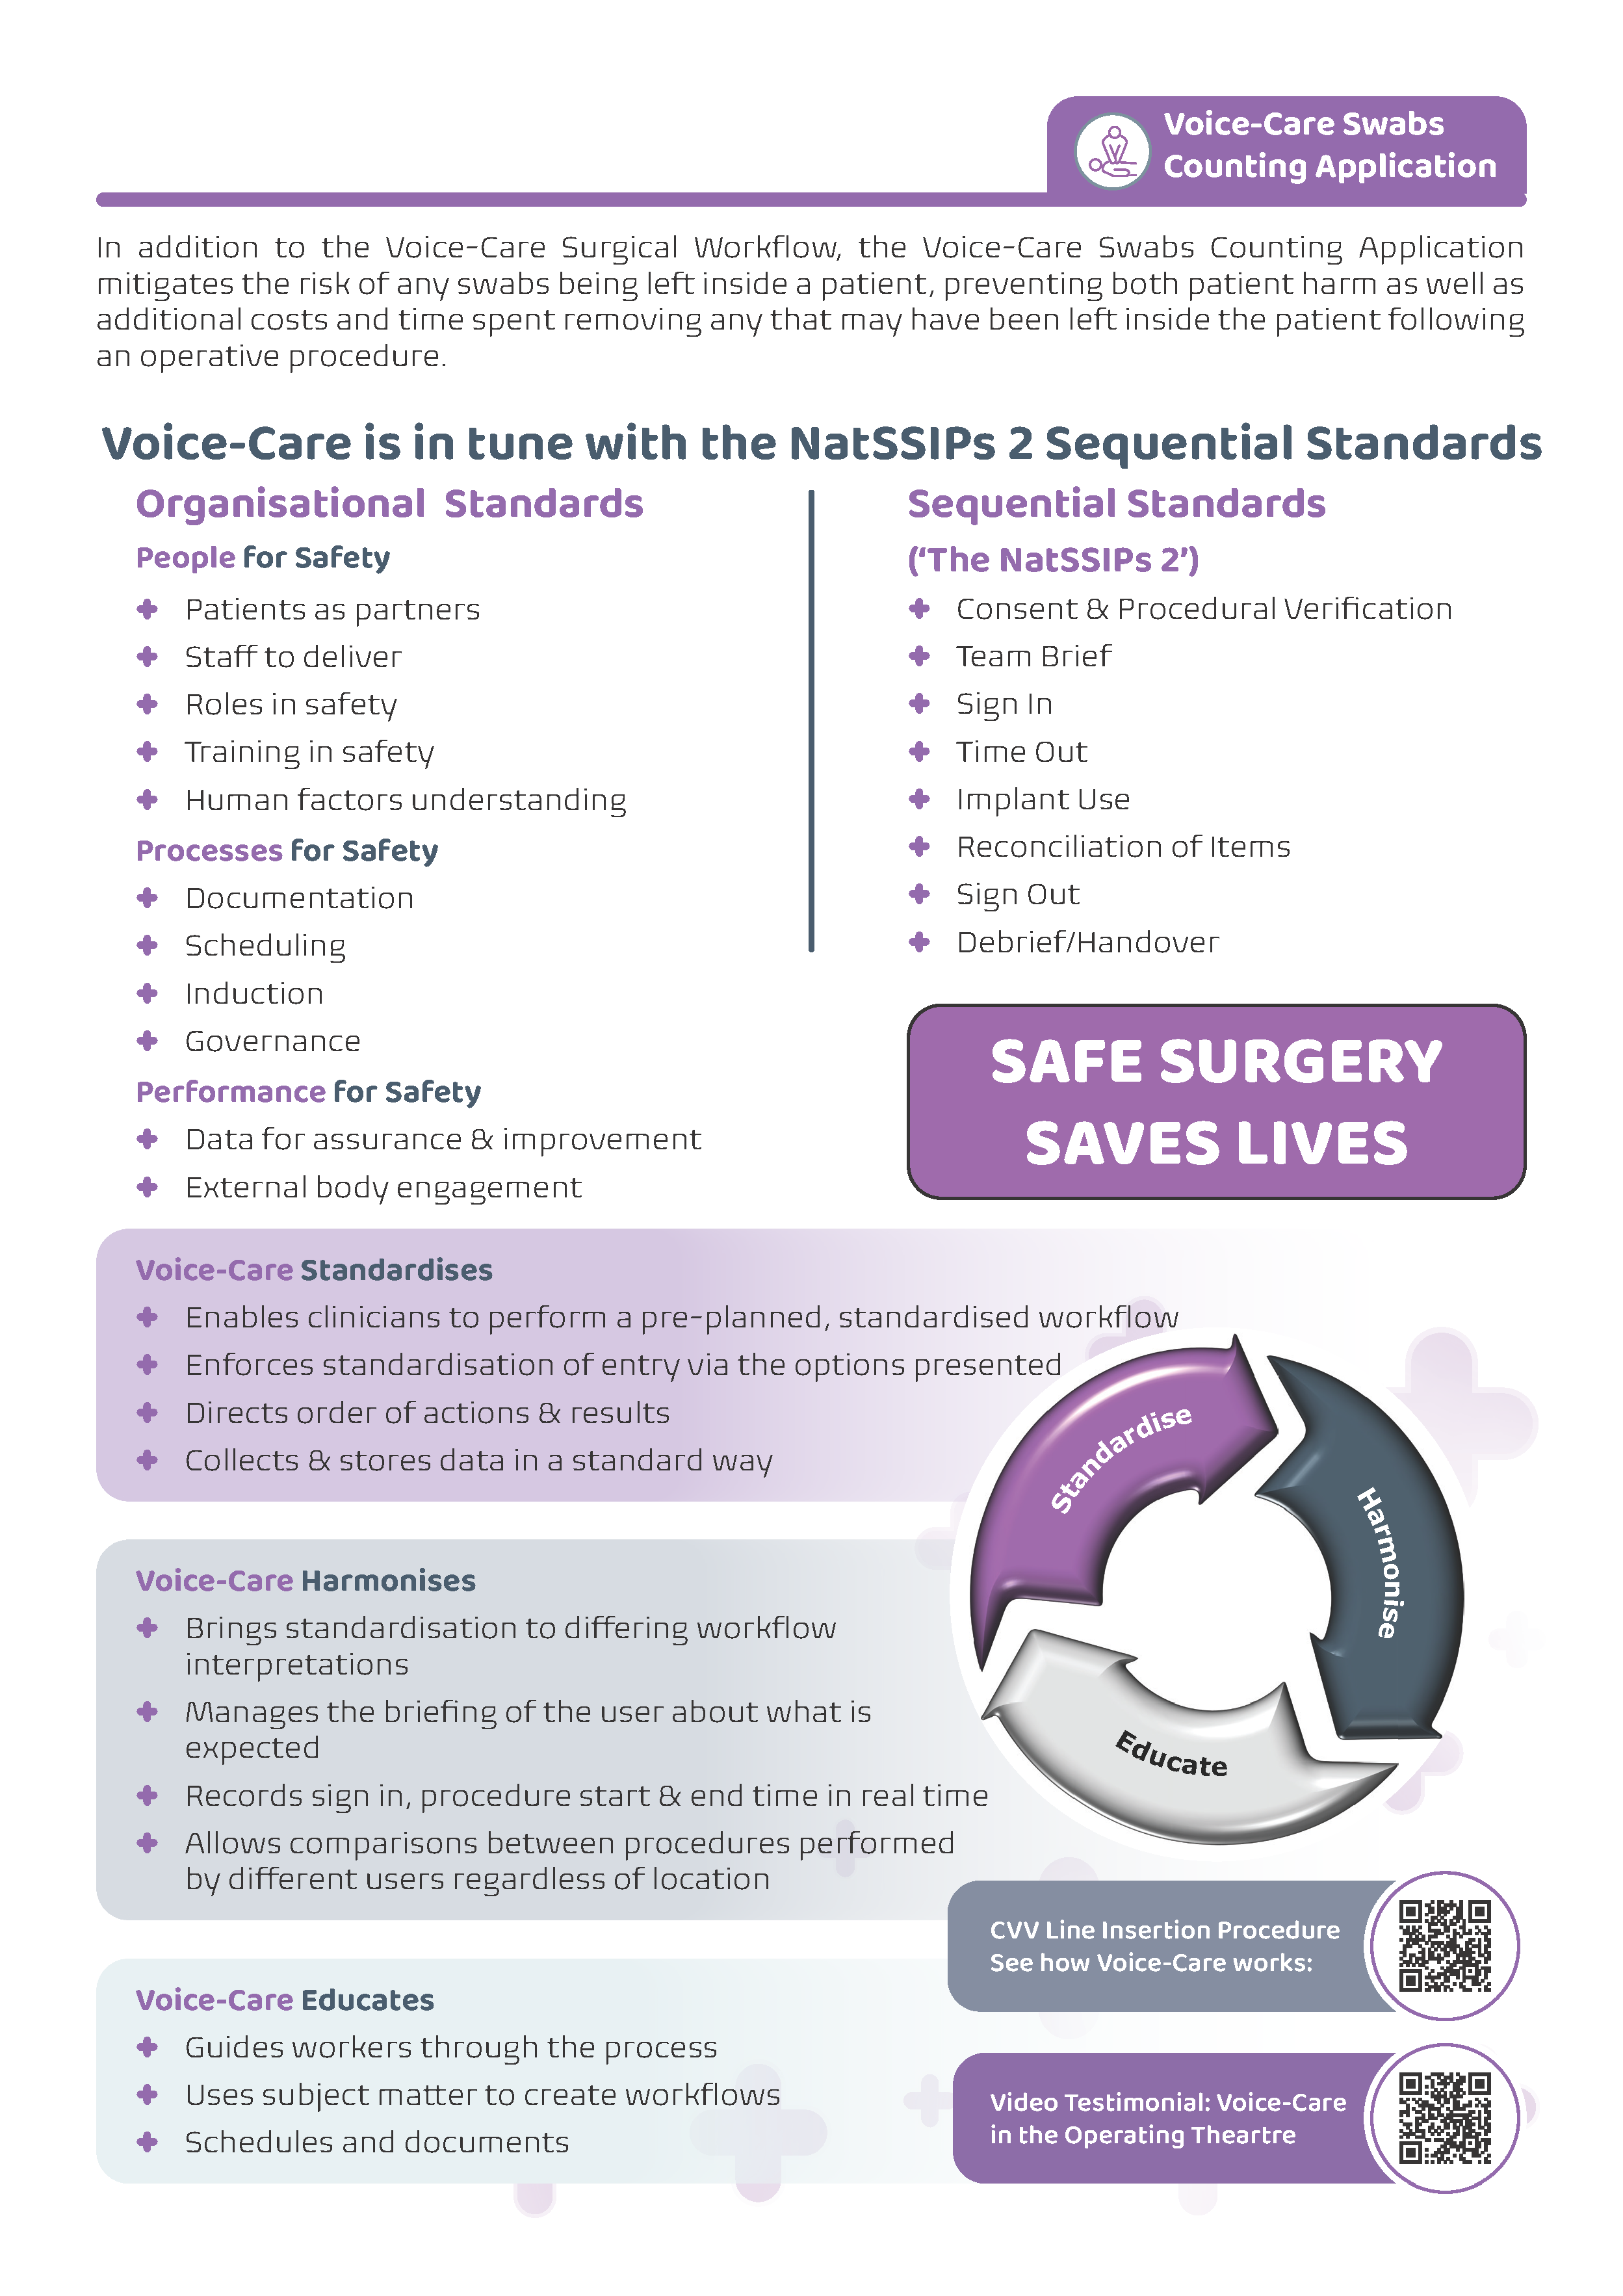 Voice-Care in the Operating Theatre